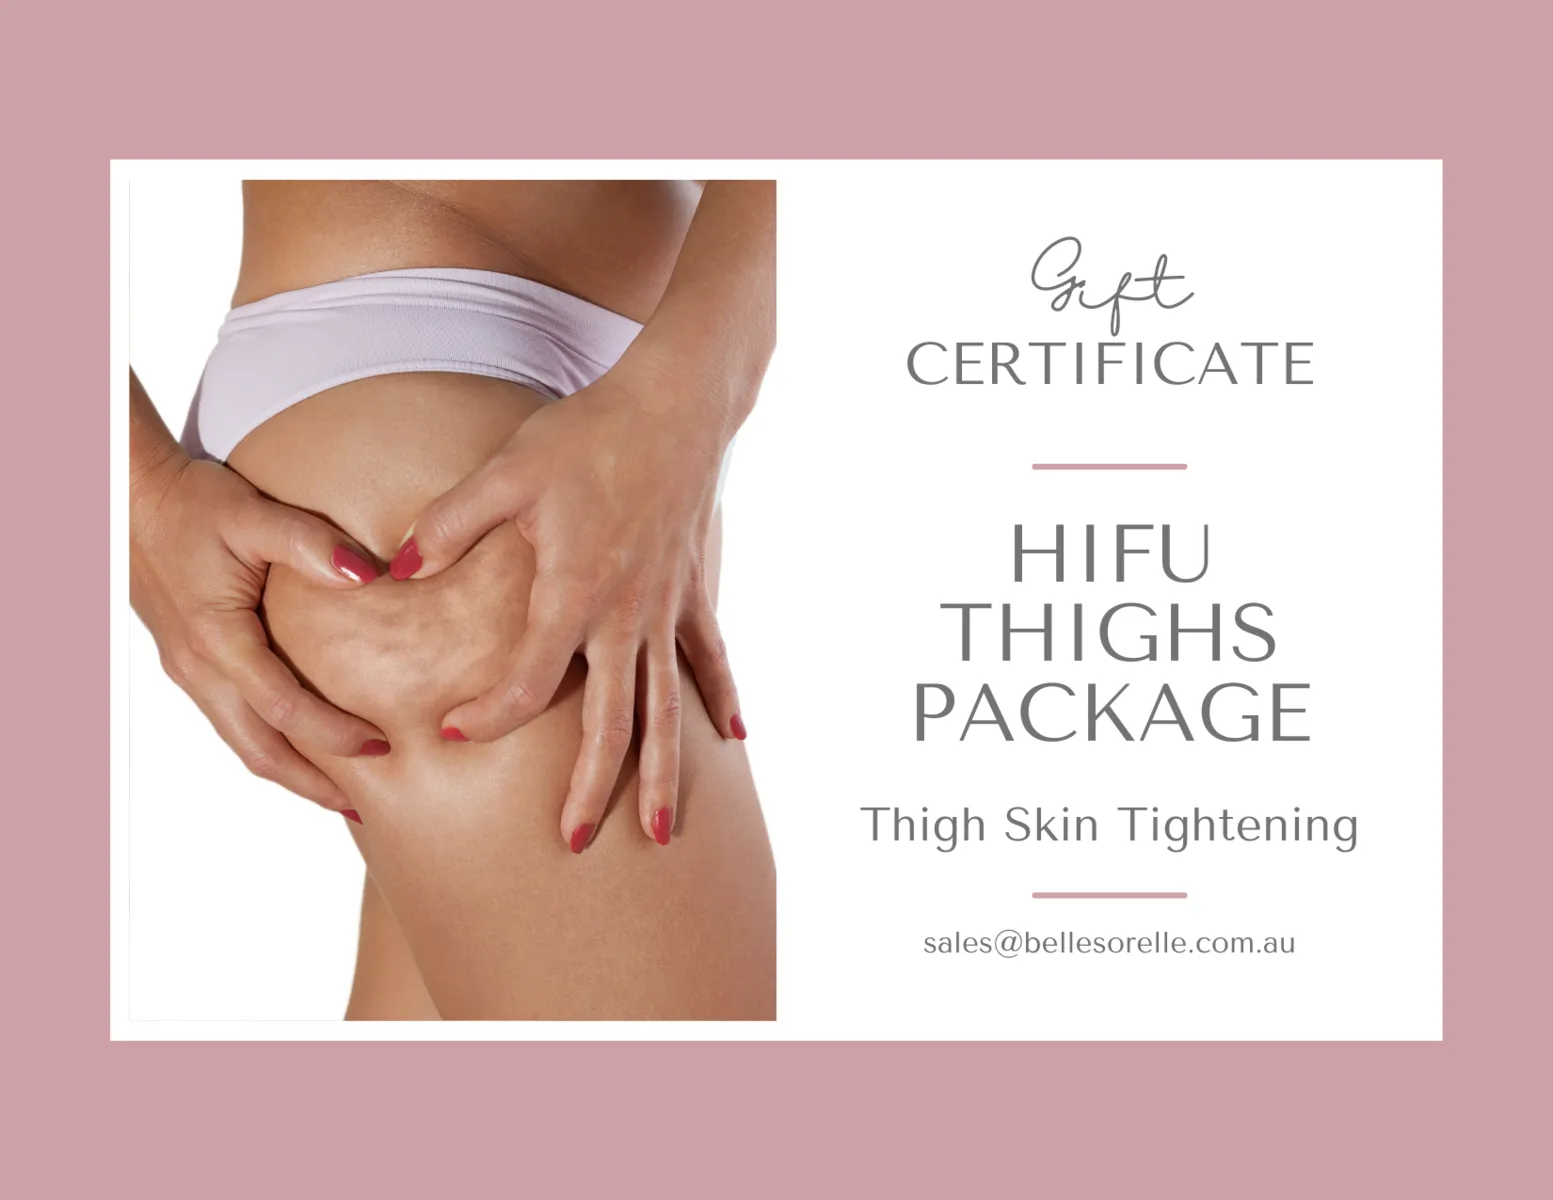 HIFU THIGH PACKAGE - Option Two